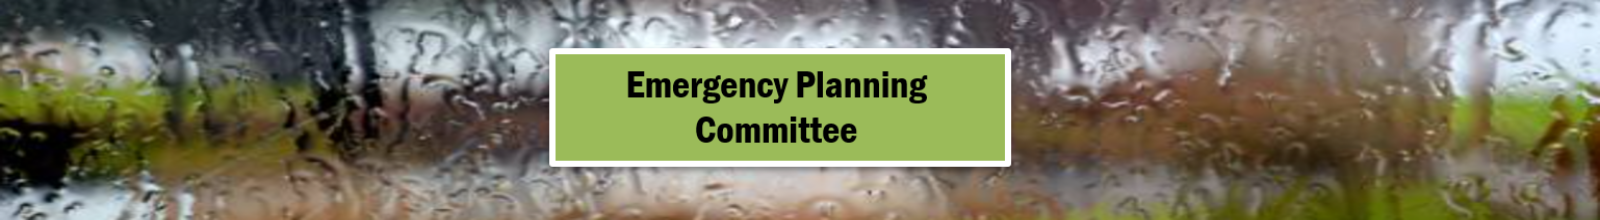 Banner of rain on glass wth the words Emergency Planning Committee